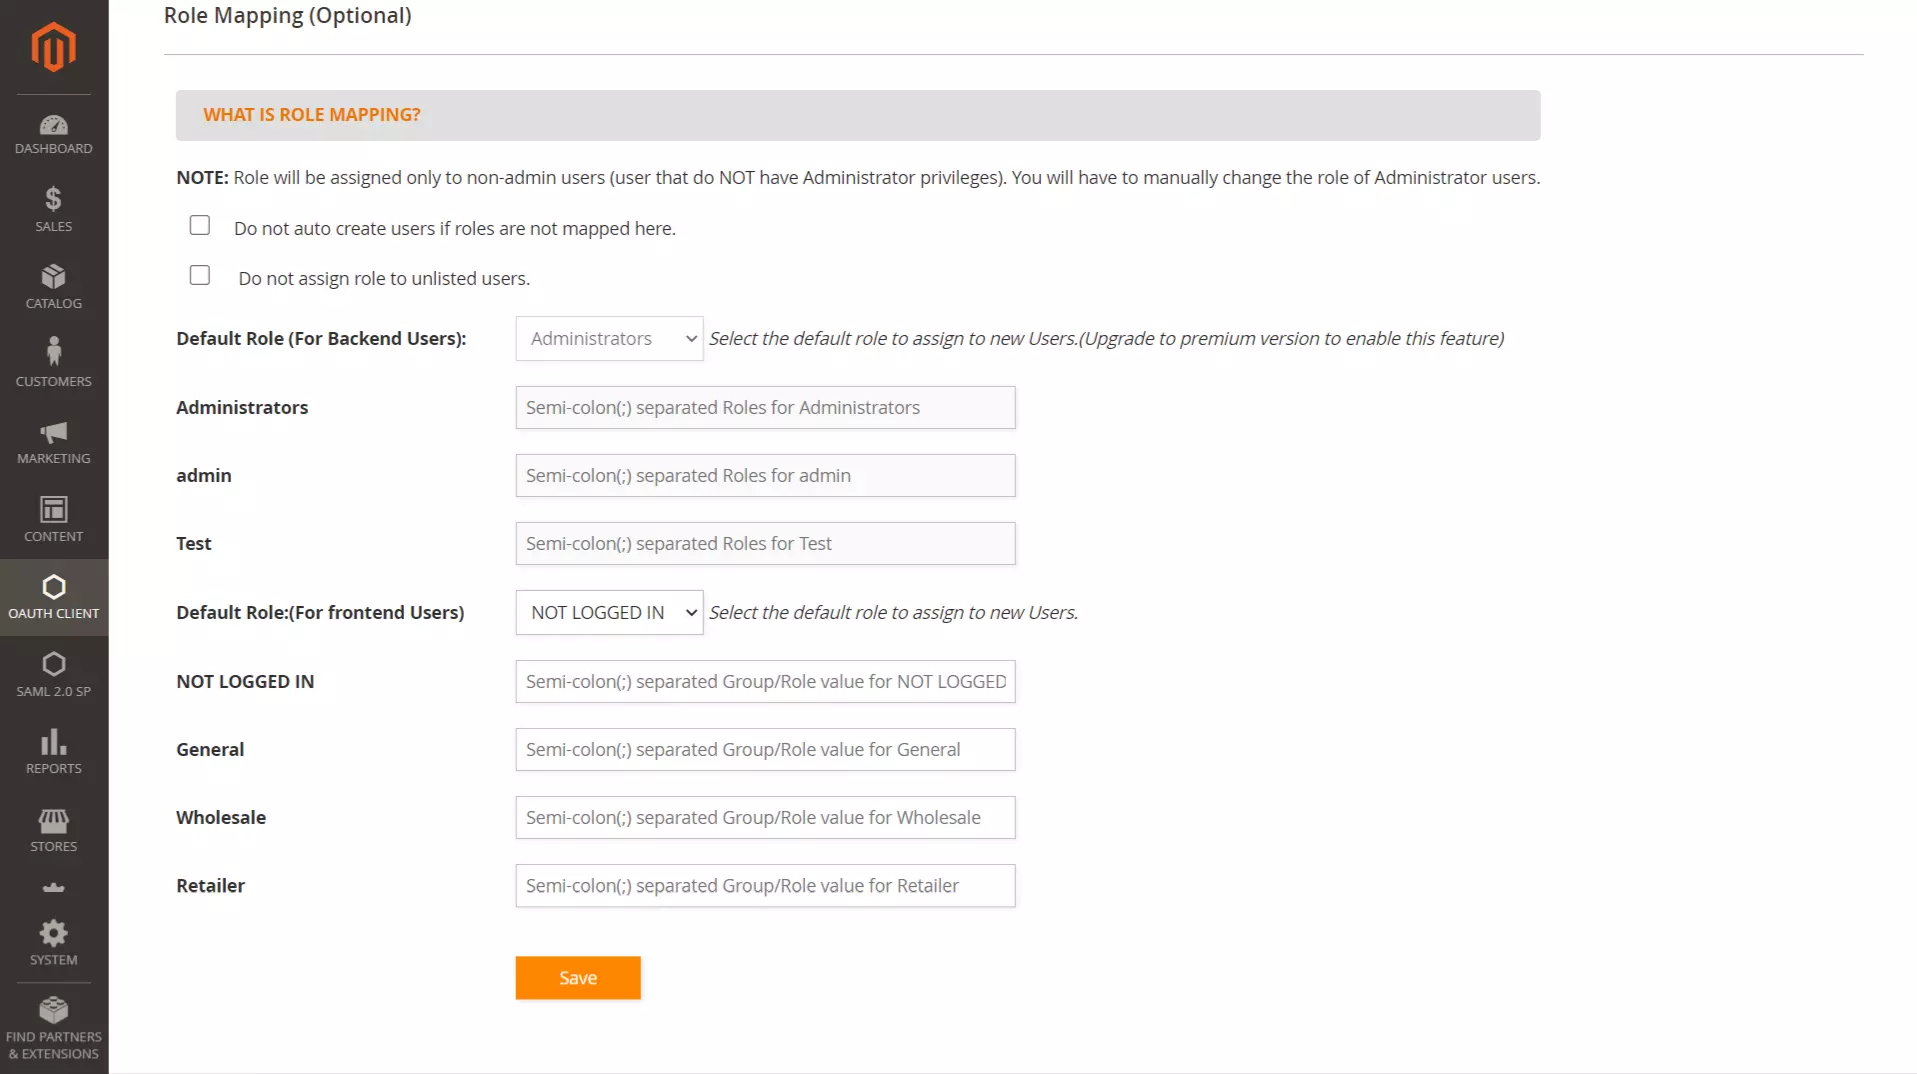 AD
FS Magento SSO - ADFS Single Sign-On(SSO) Login in Magento - role mapping